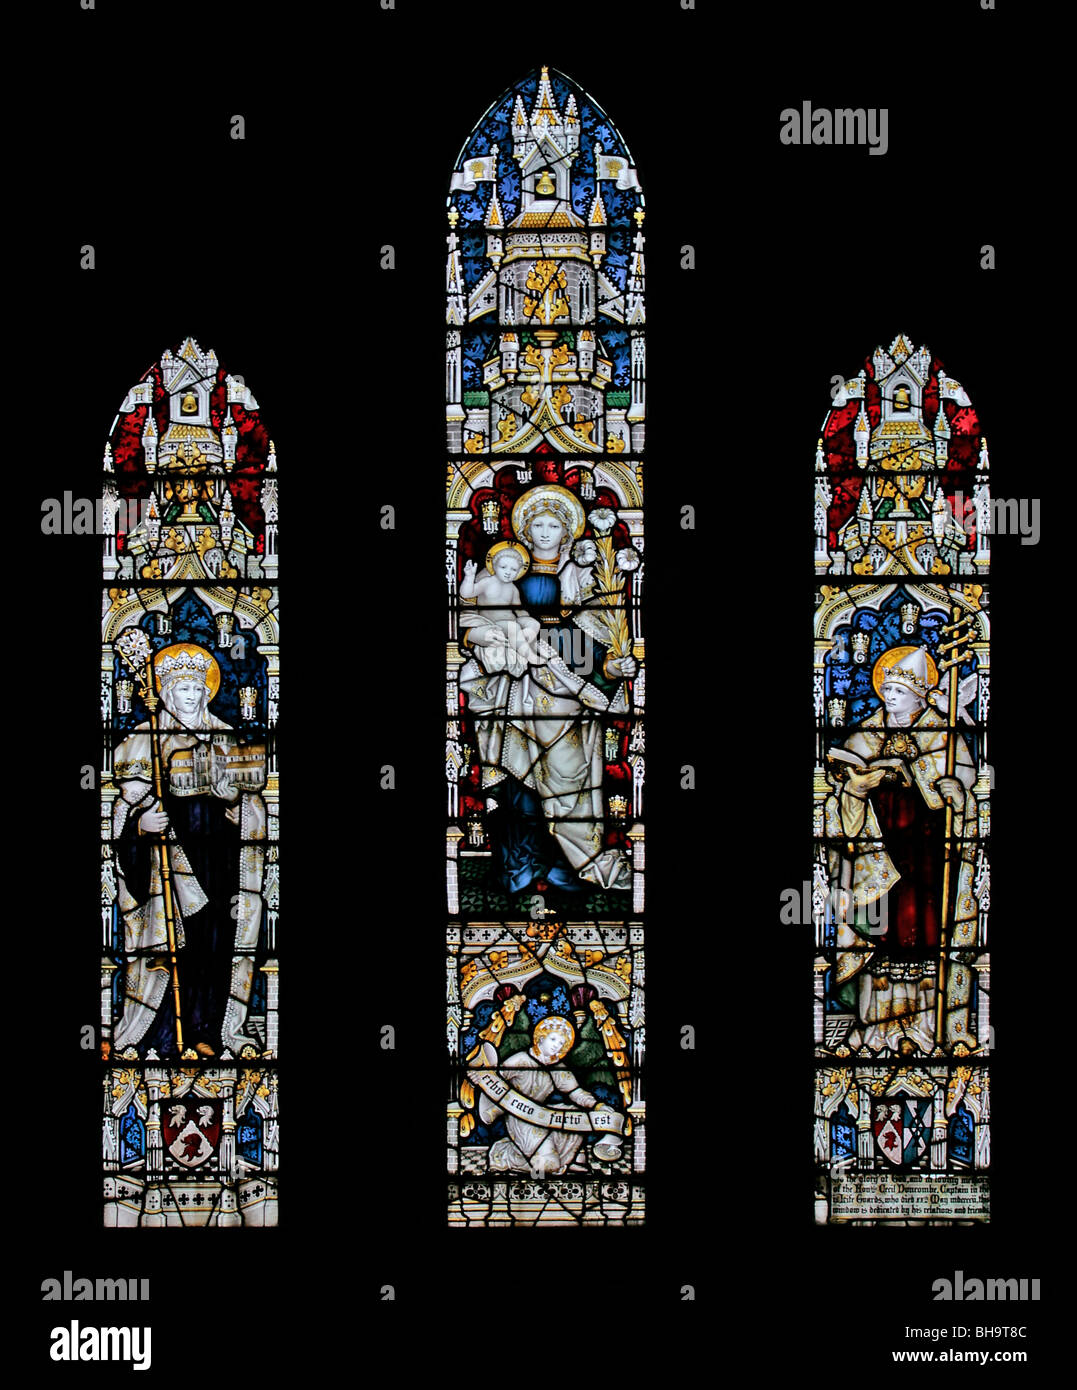 Stained glass windows by C E Kempe depicting the Virgin Mary and child, St Hilda and Saint Cuthbert; St Hilda's Church, Beadlam, North Yorkshire Stock Photo